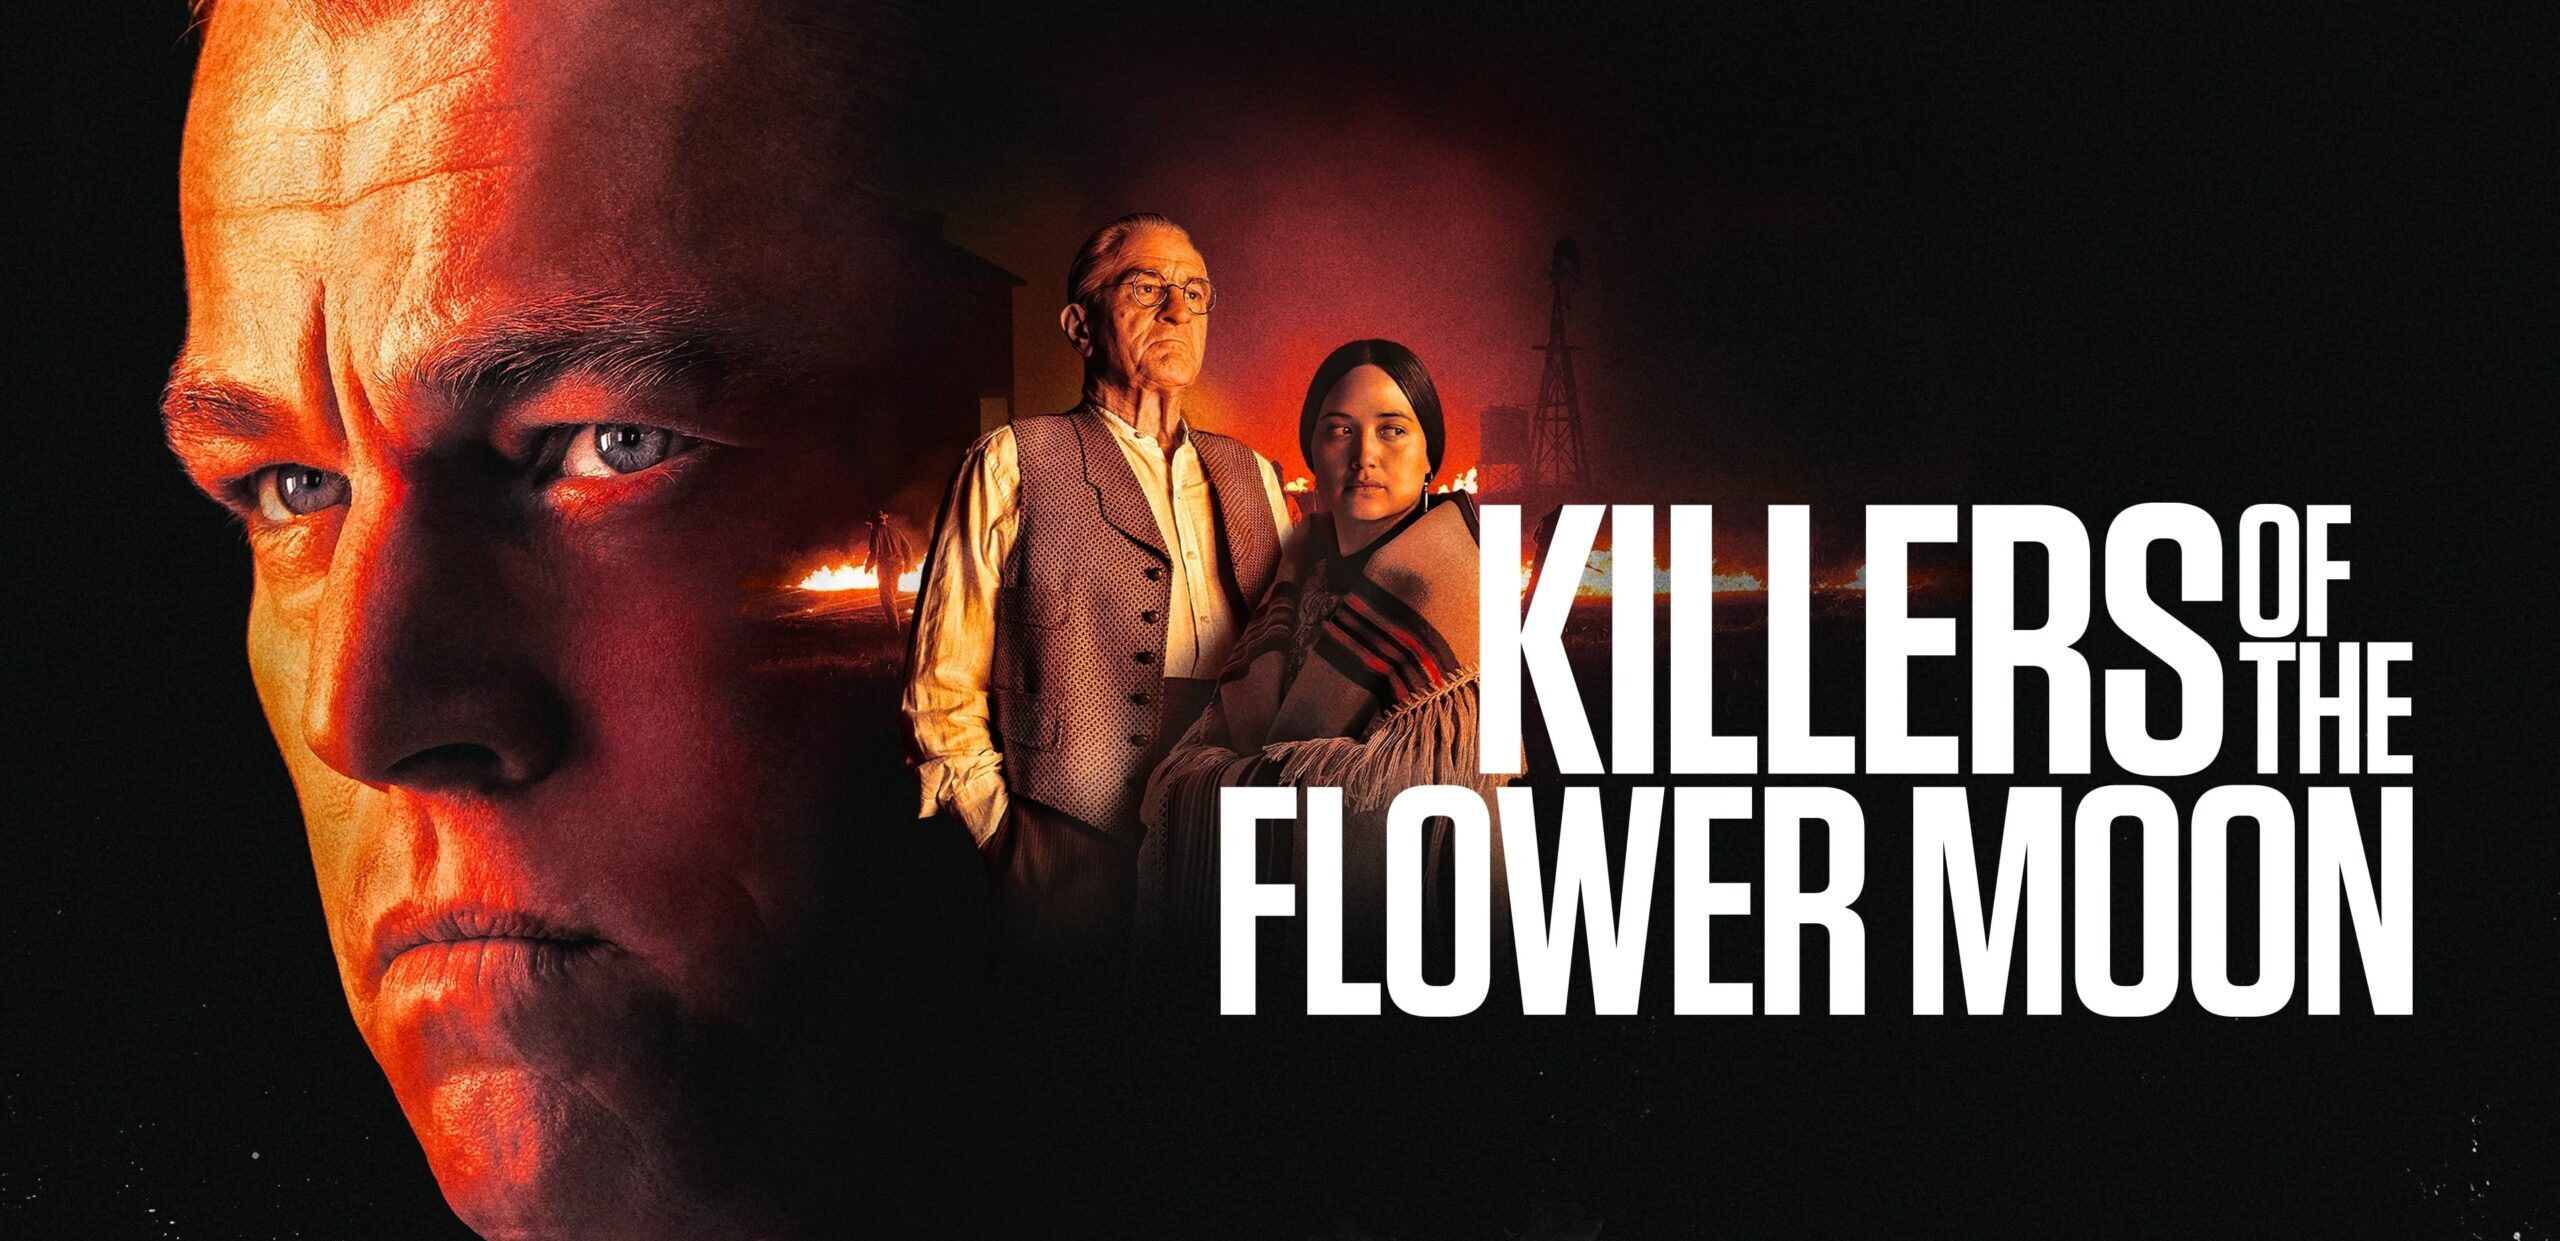 title poster for Killers of the Flower Moon